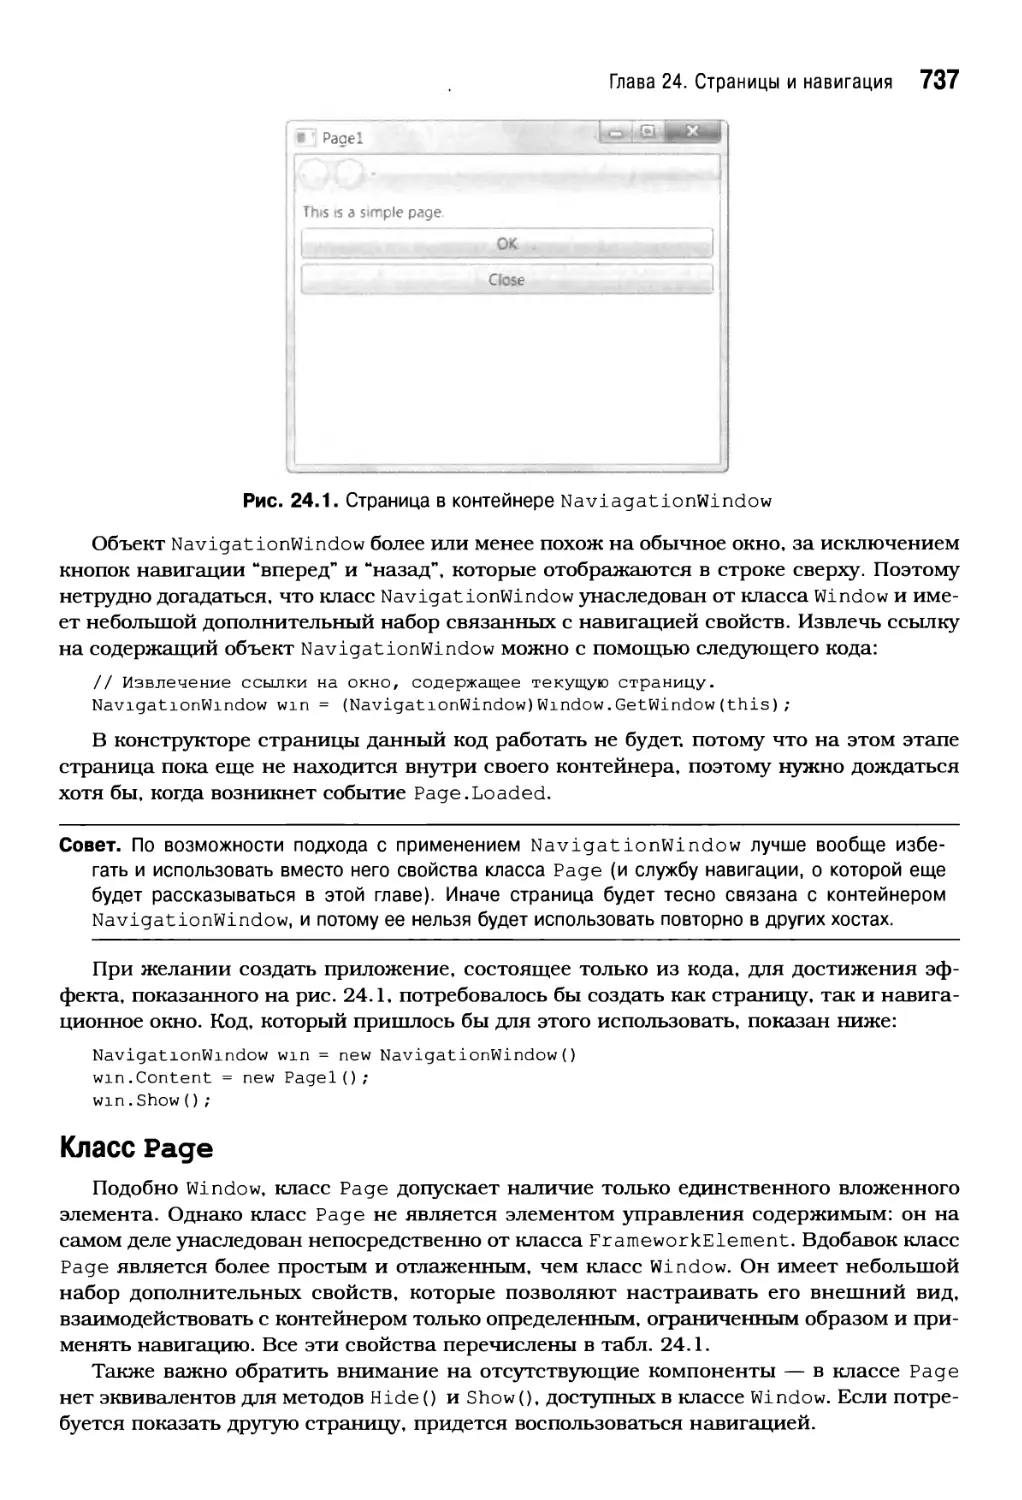 Класс Page